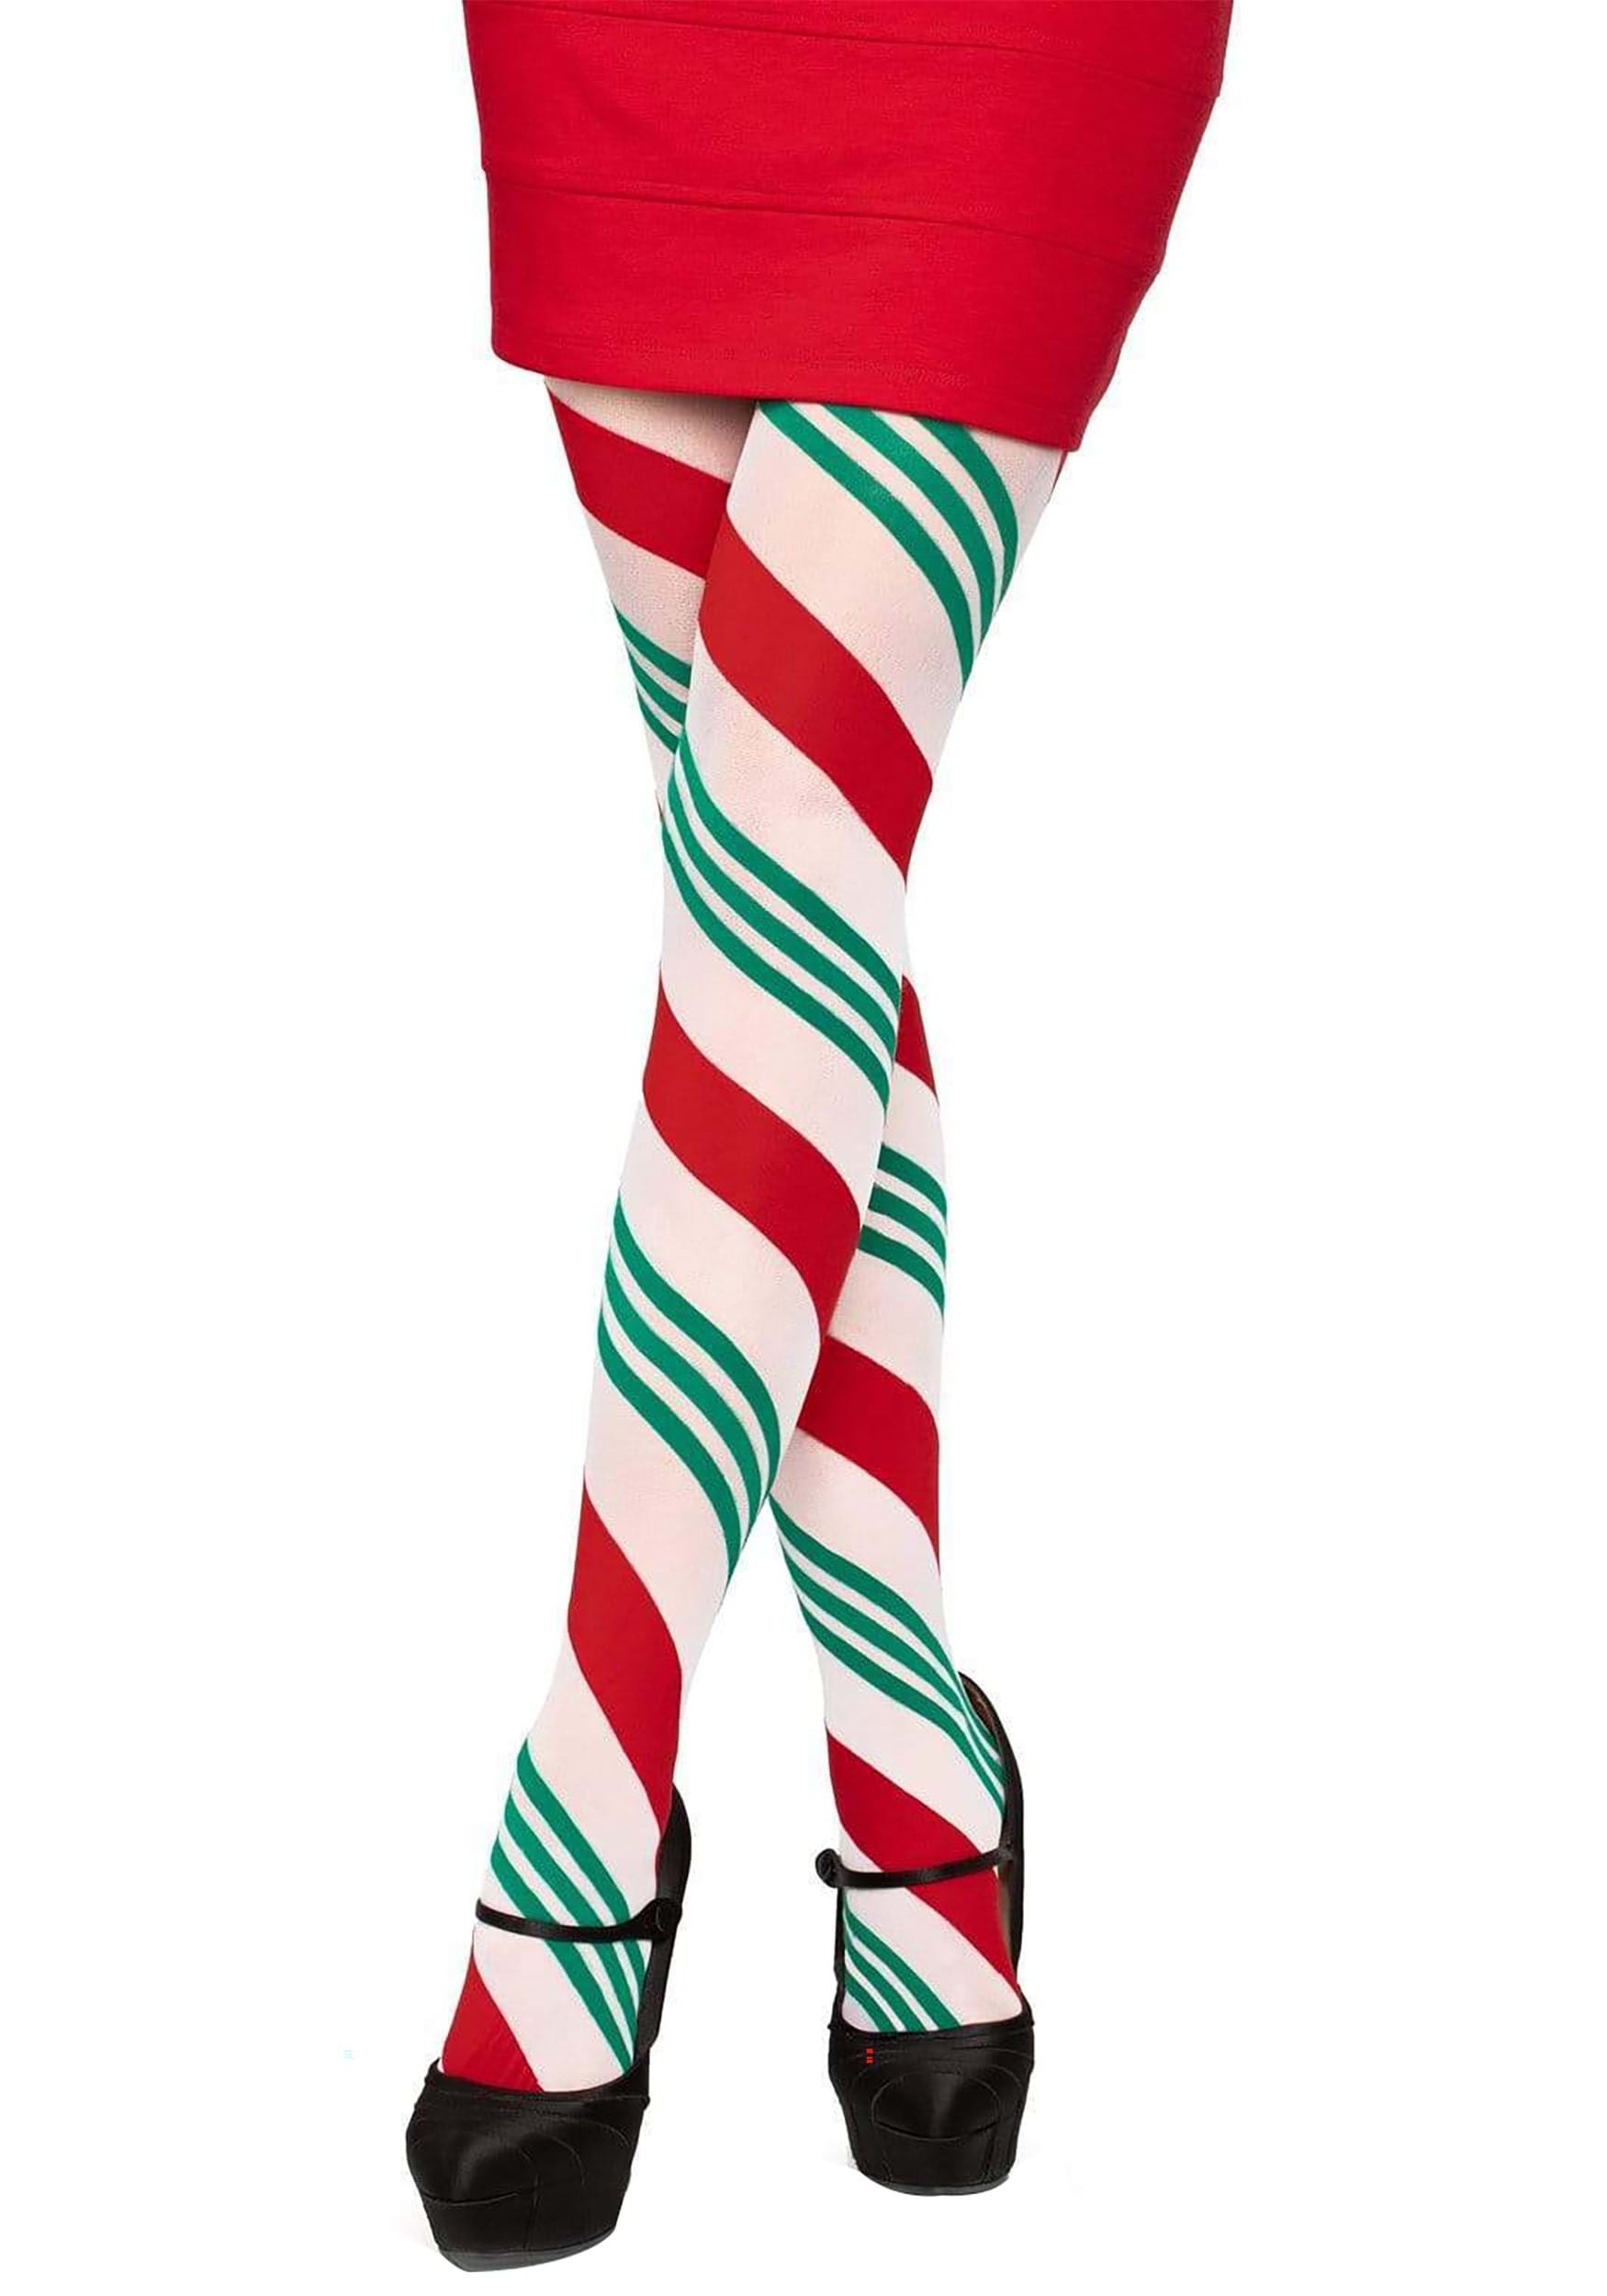 Red and Green Candy Cane Striped Tights